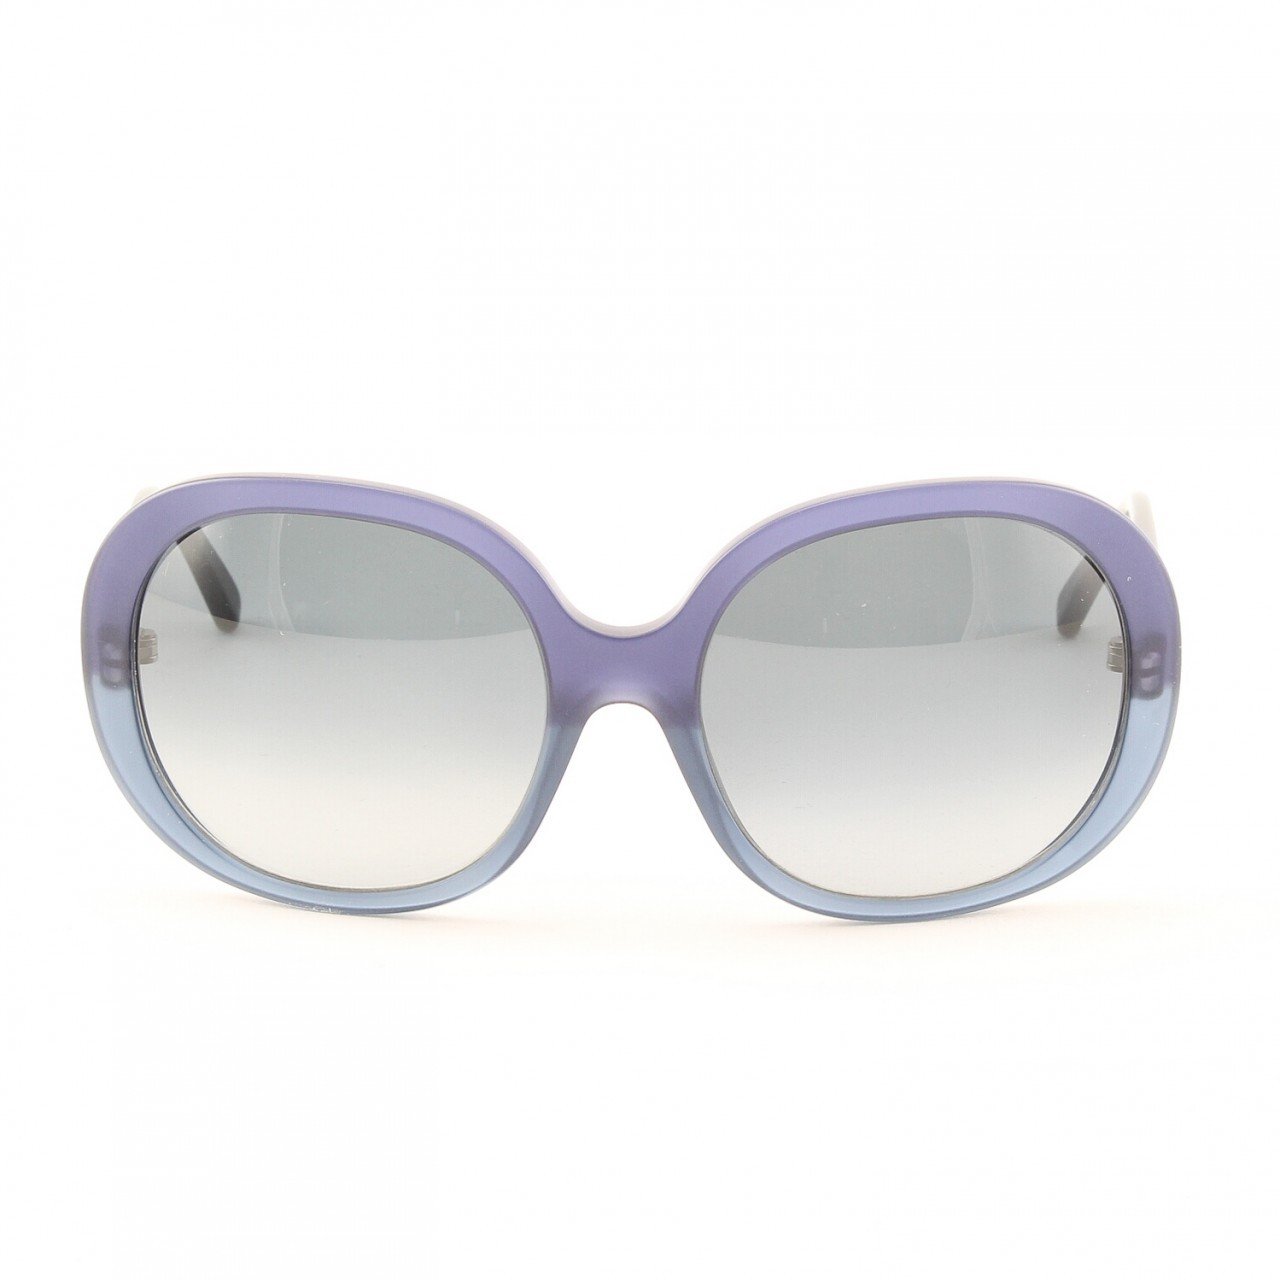 Marni MA221 Sunglasses Col. 01 Opaque Navy Blue with Gradient Gray Lenses